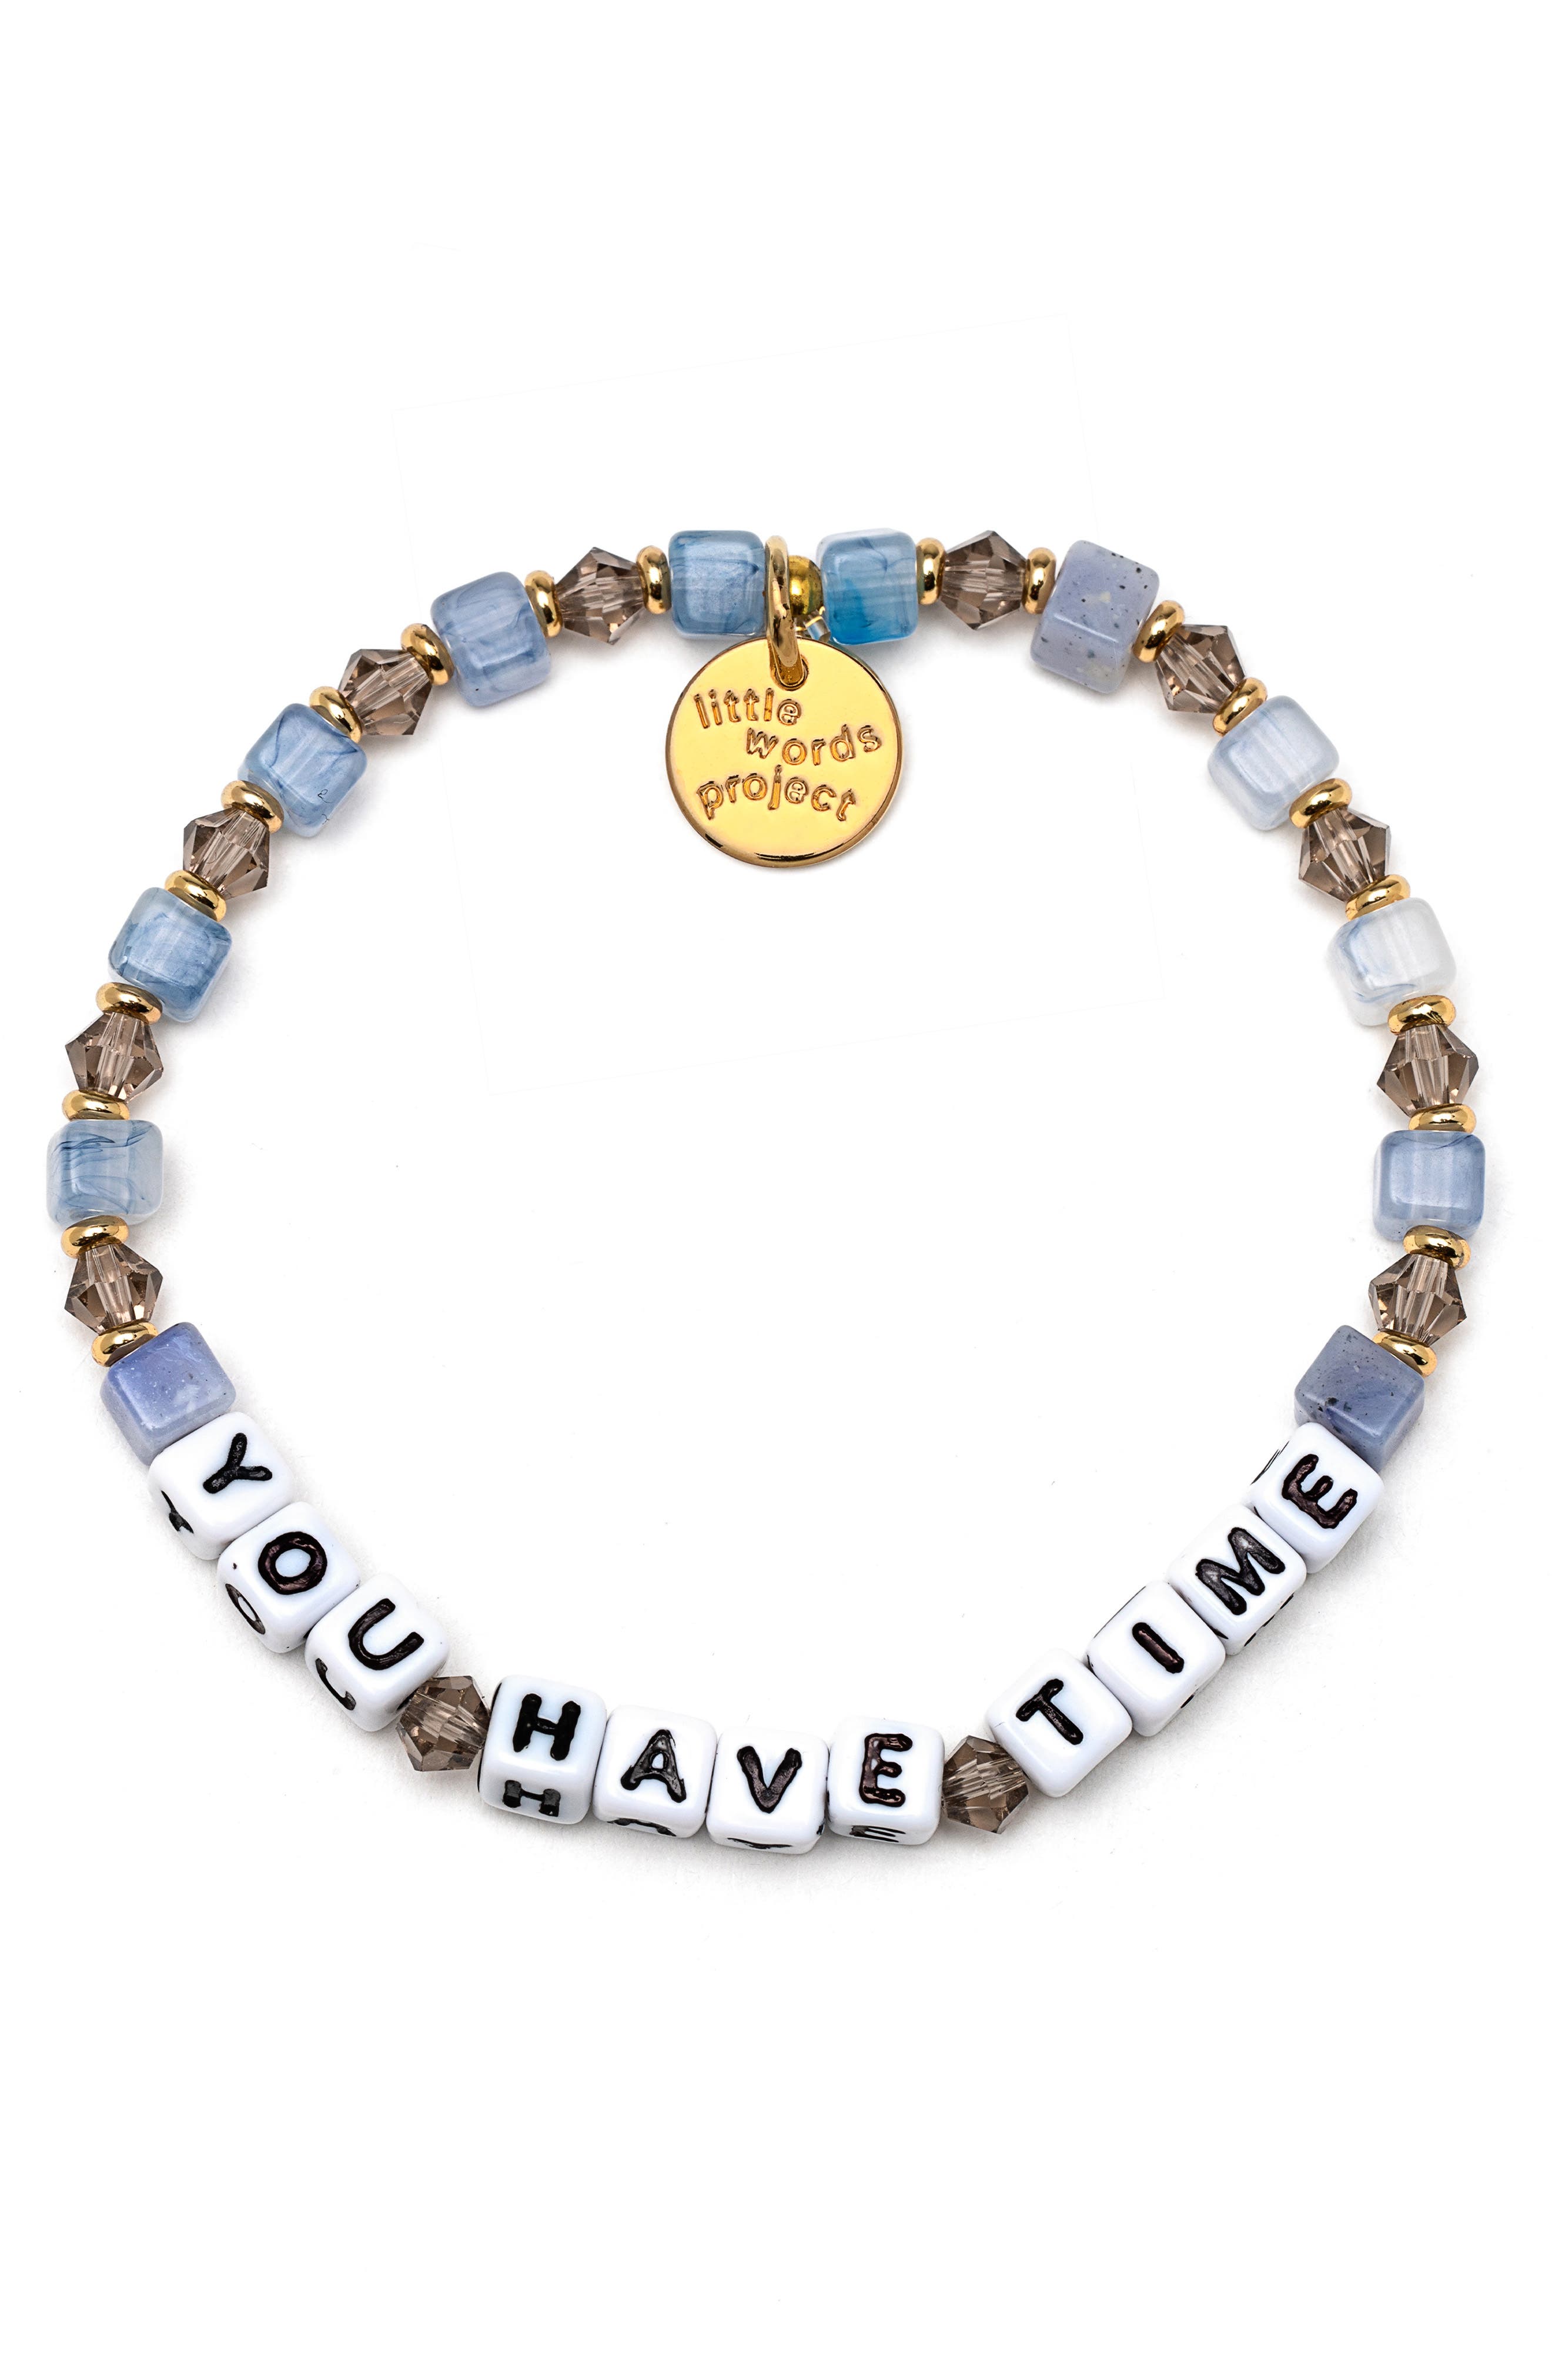 Little Words Project You Have Time Beaded Stretch Bracelet